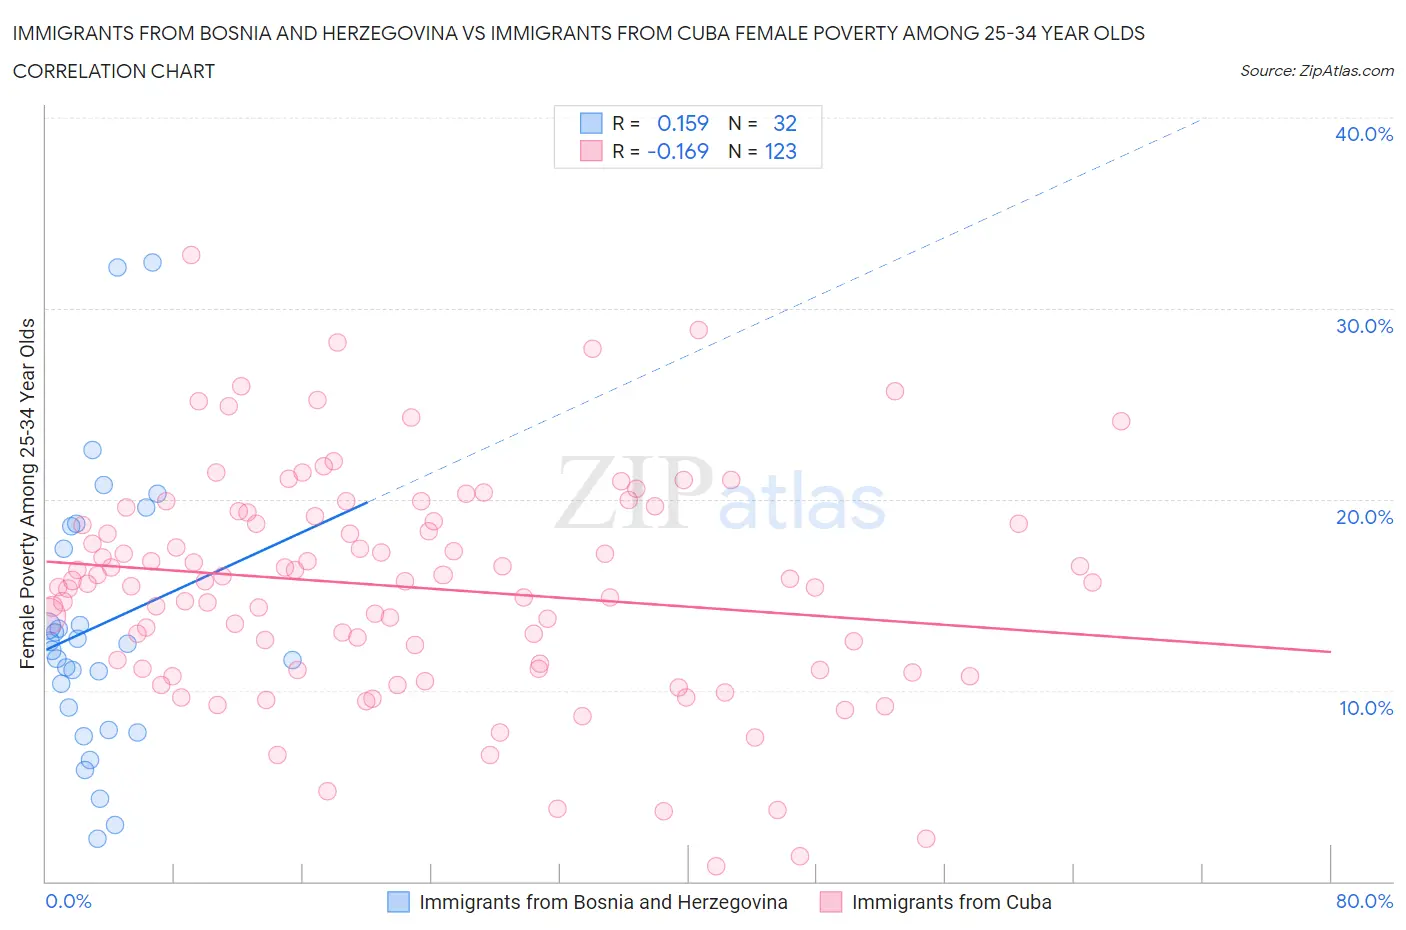 Immigrants from Bosnia and Herzegovina vs Immigrants from Cuba Female Poverty Among 25-34 Year Olds